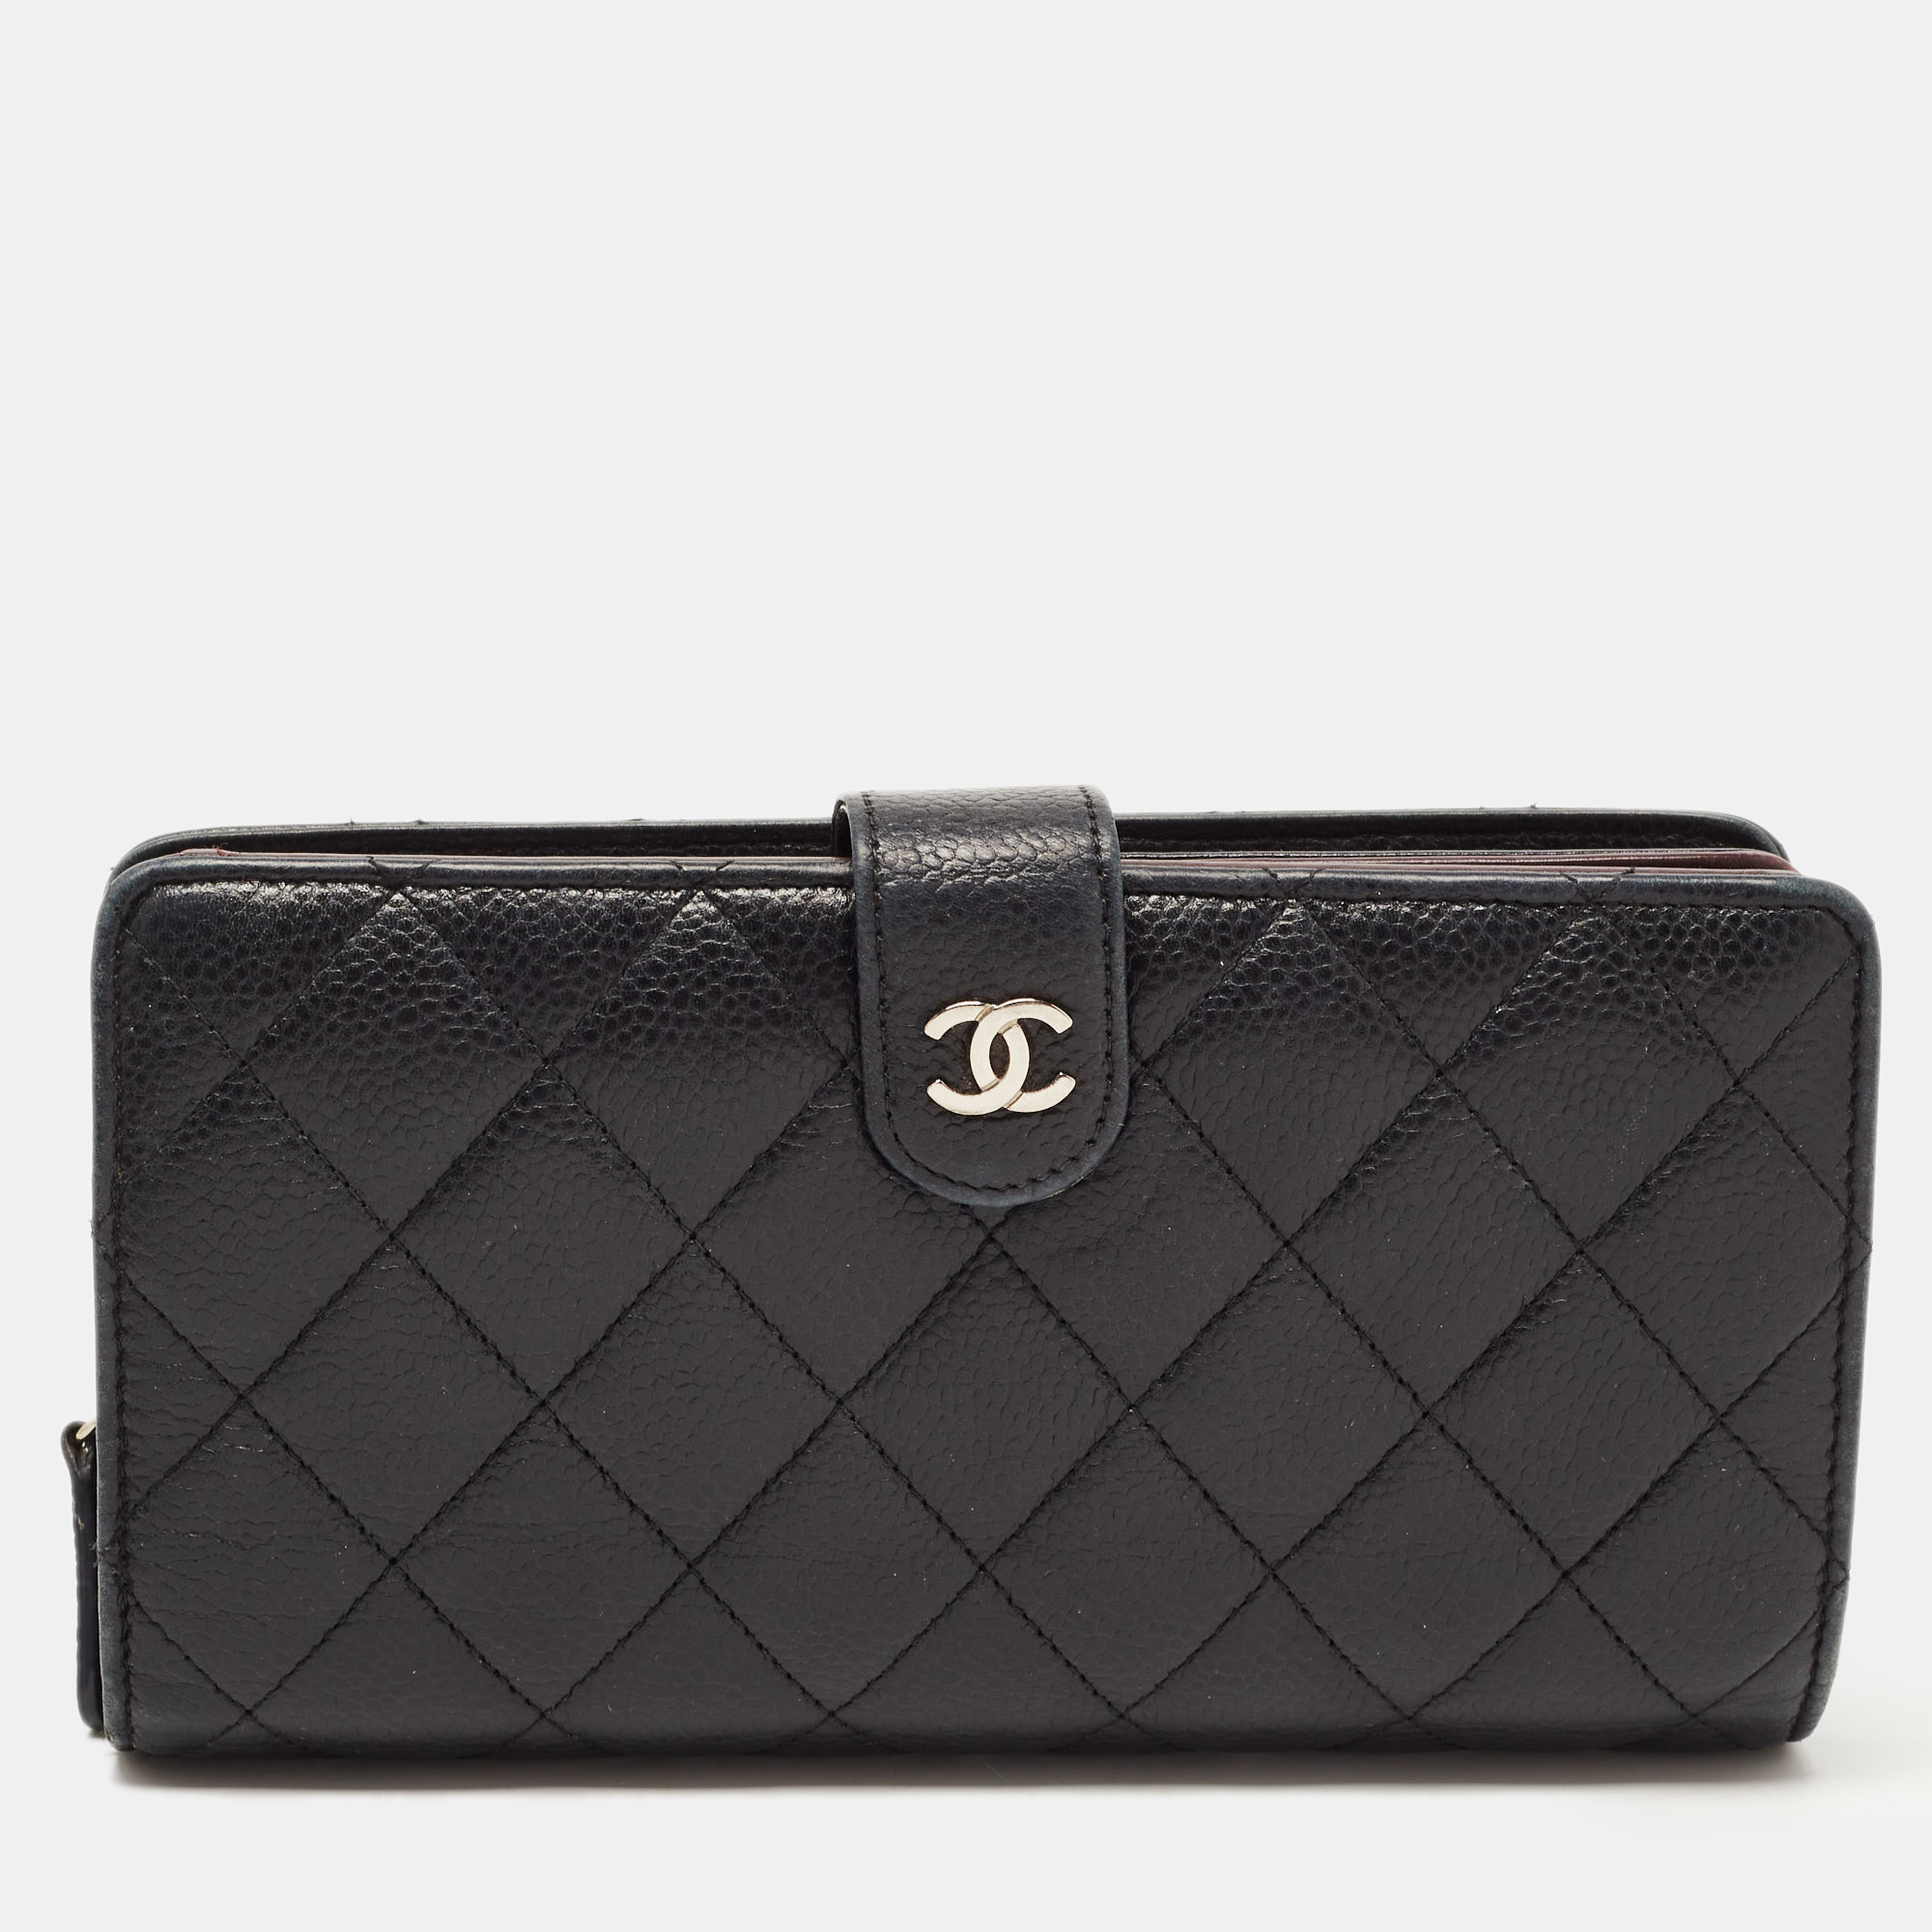 Chanel Black Quilted Caviar Leather CC Continental Zip Wallet